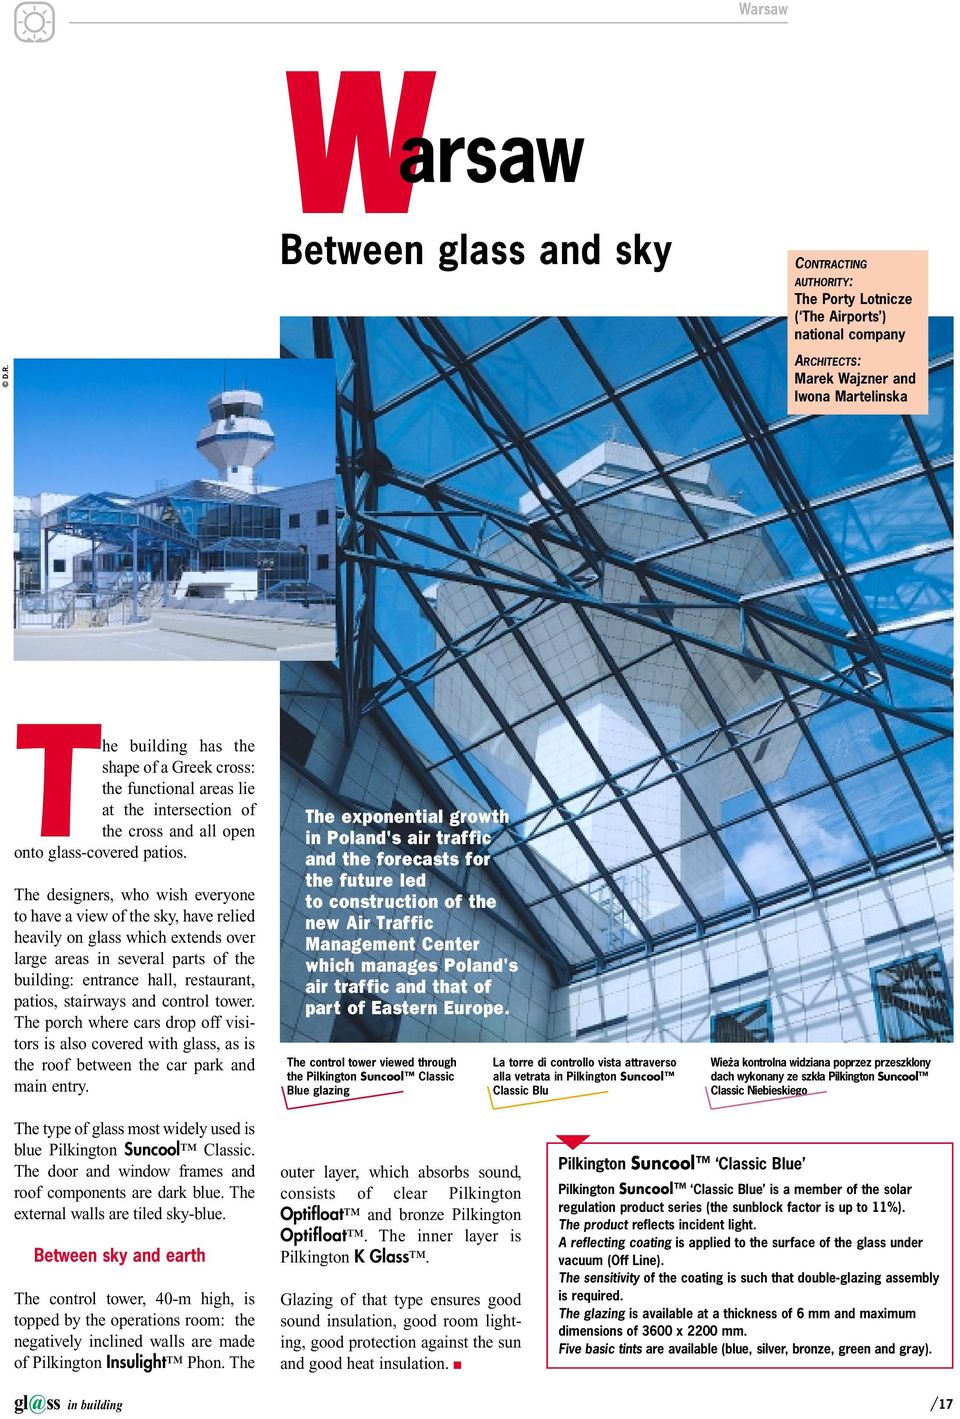 The designers, who wish everyone to have a view of the sky, have relied heavily on glass which extends over large areas in several parts of the building: entrance hall, restaurant, patios, stairways